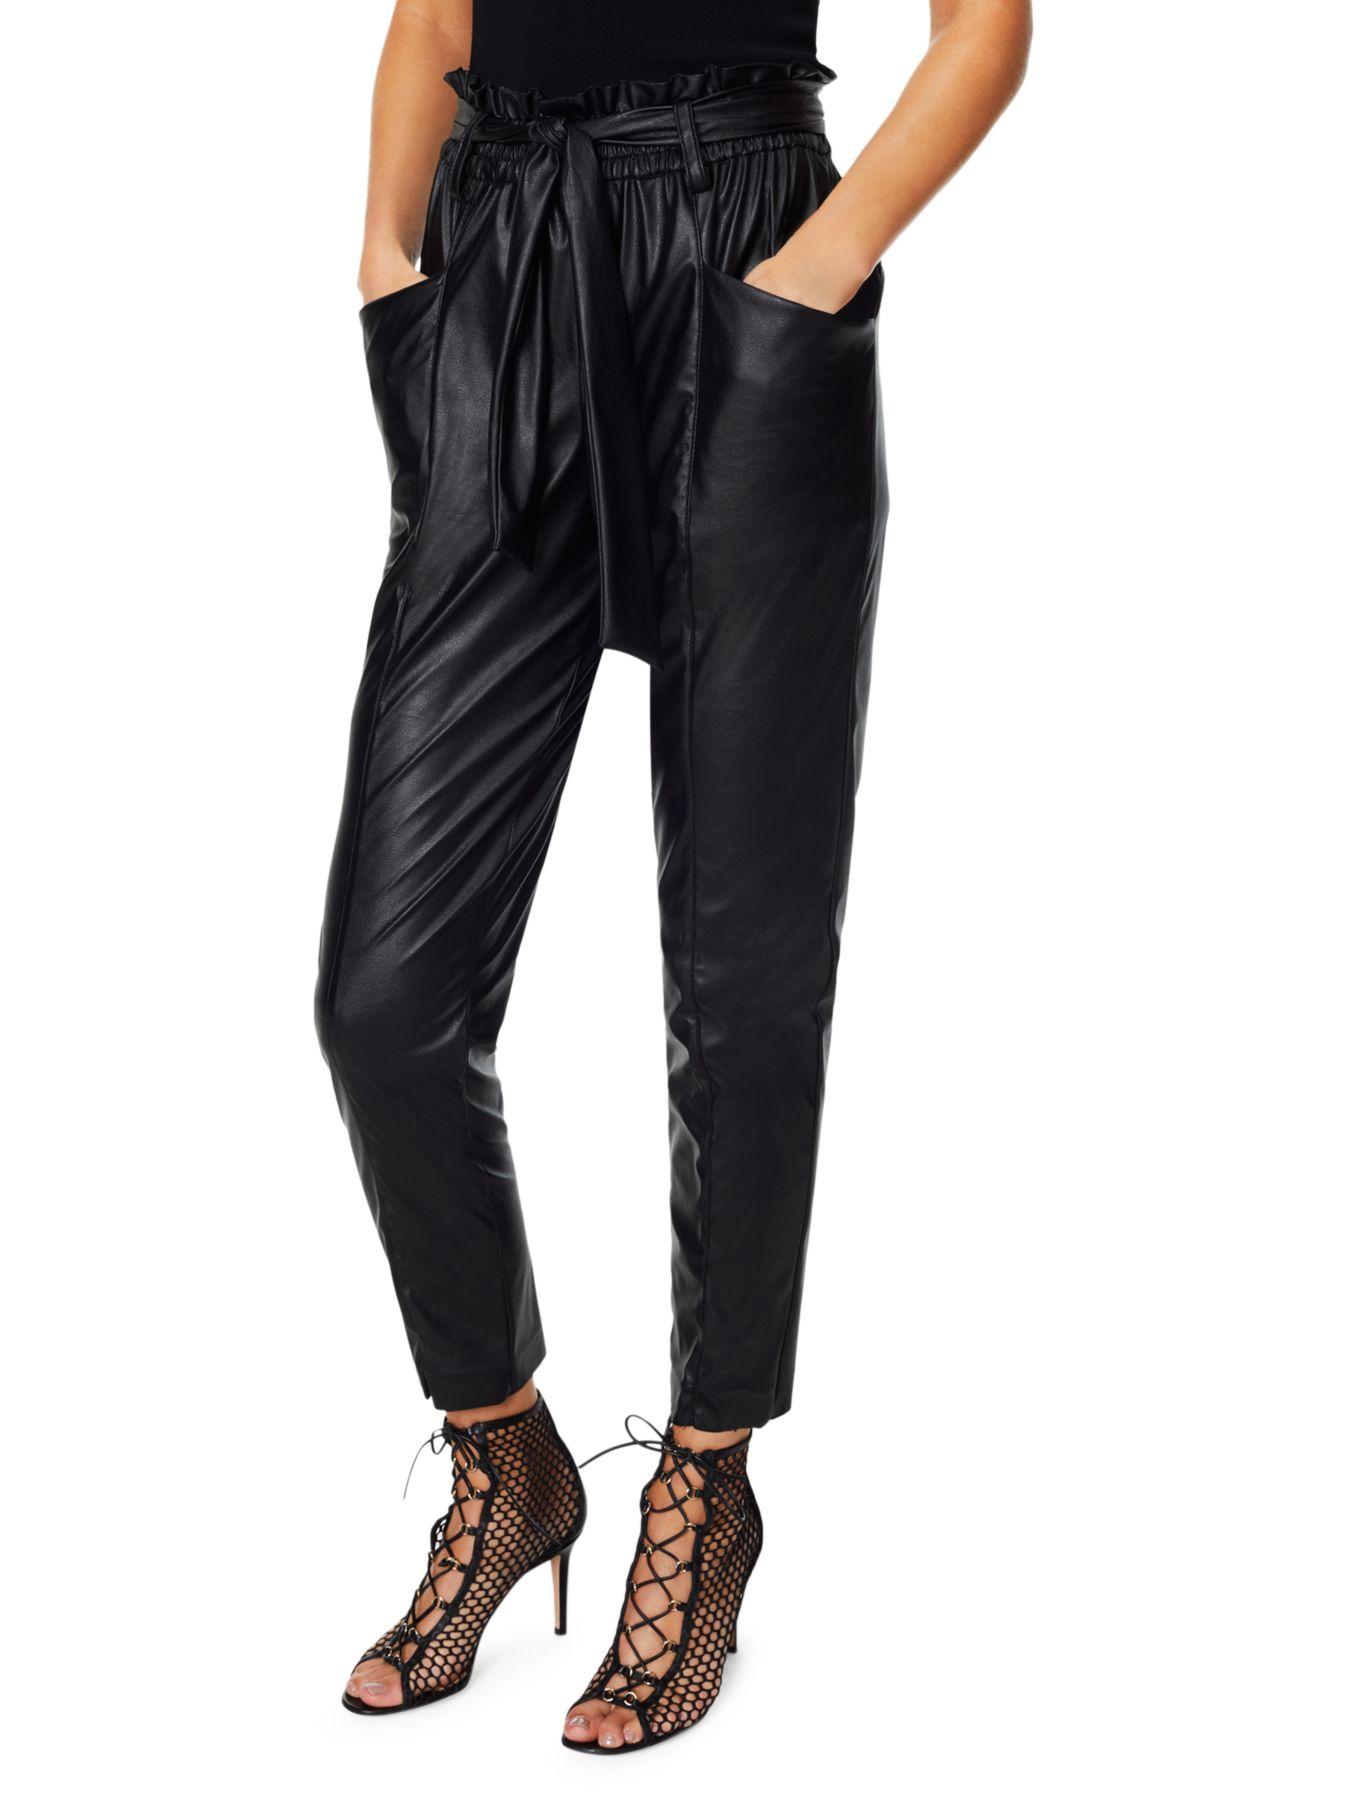 Ramy Brook Marty Faux-leather Pants in Black - Lyst